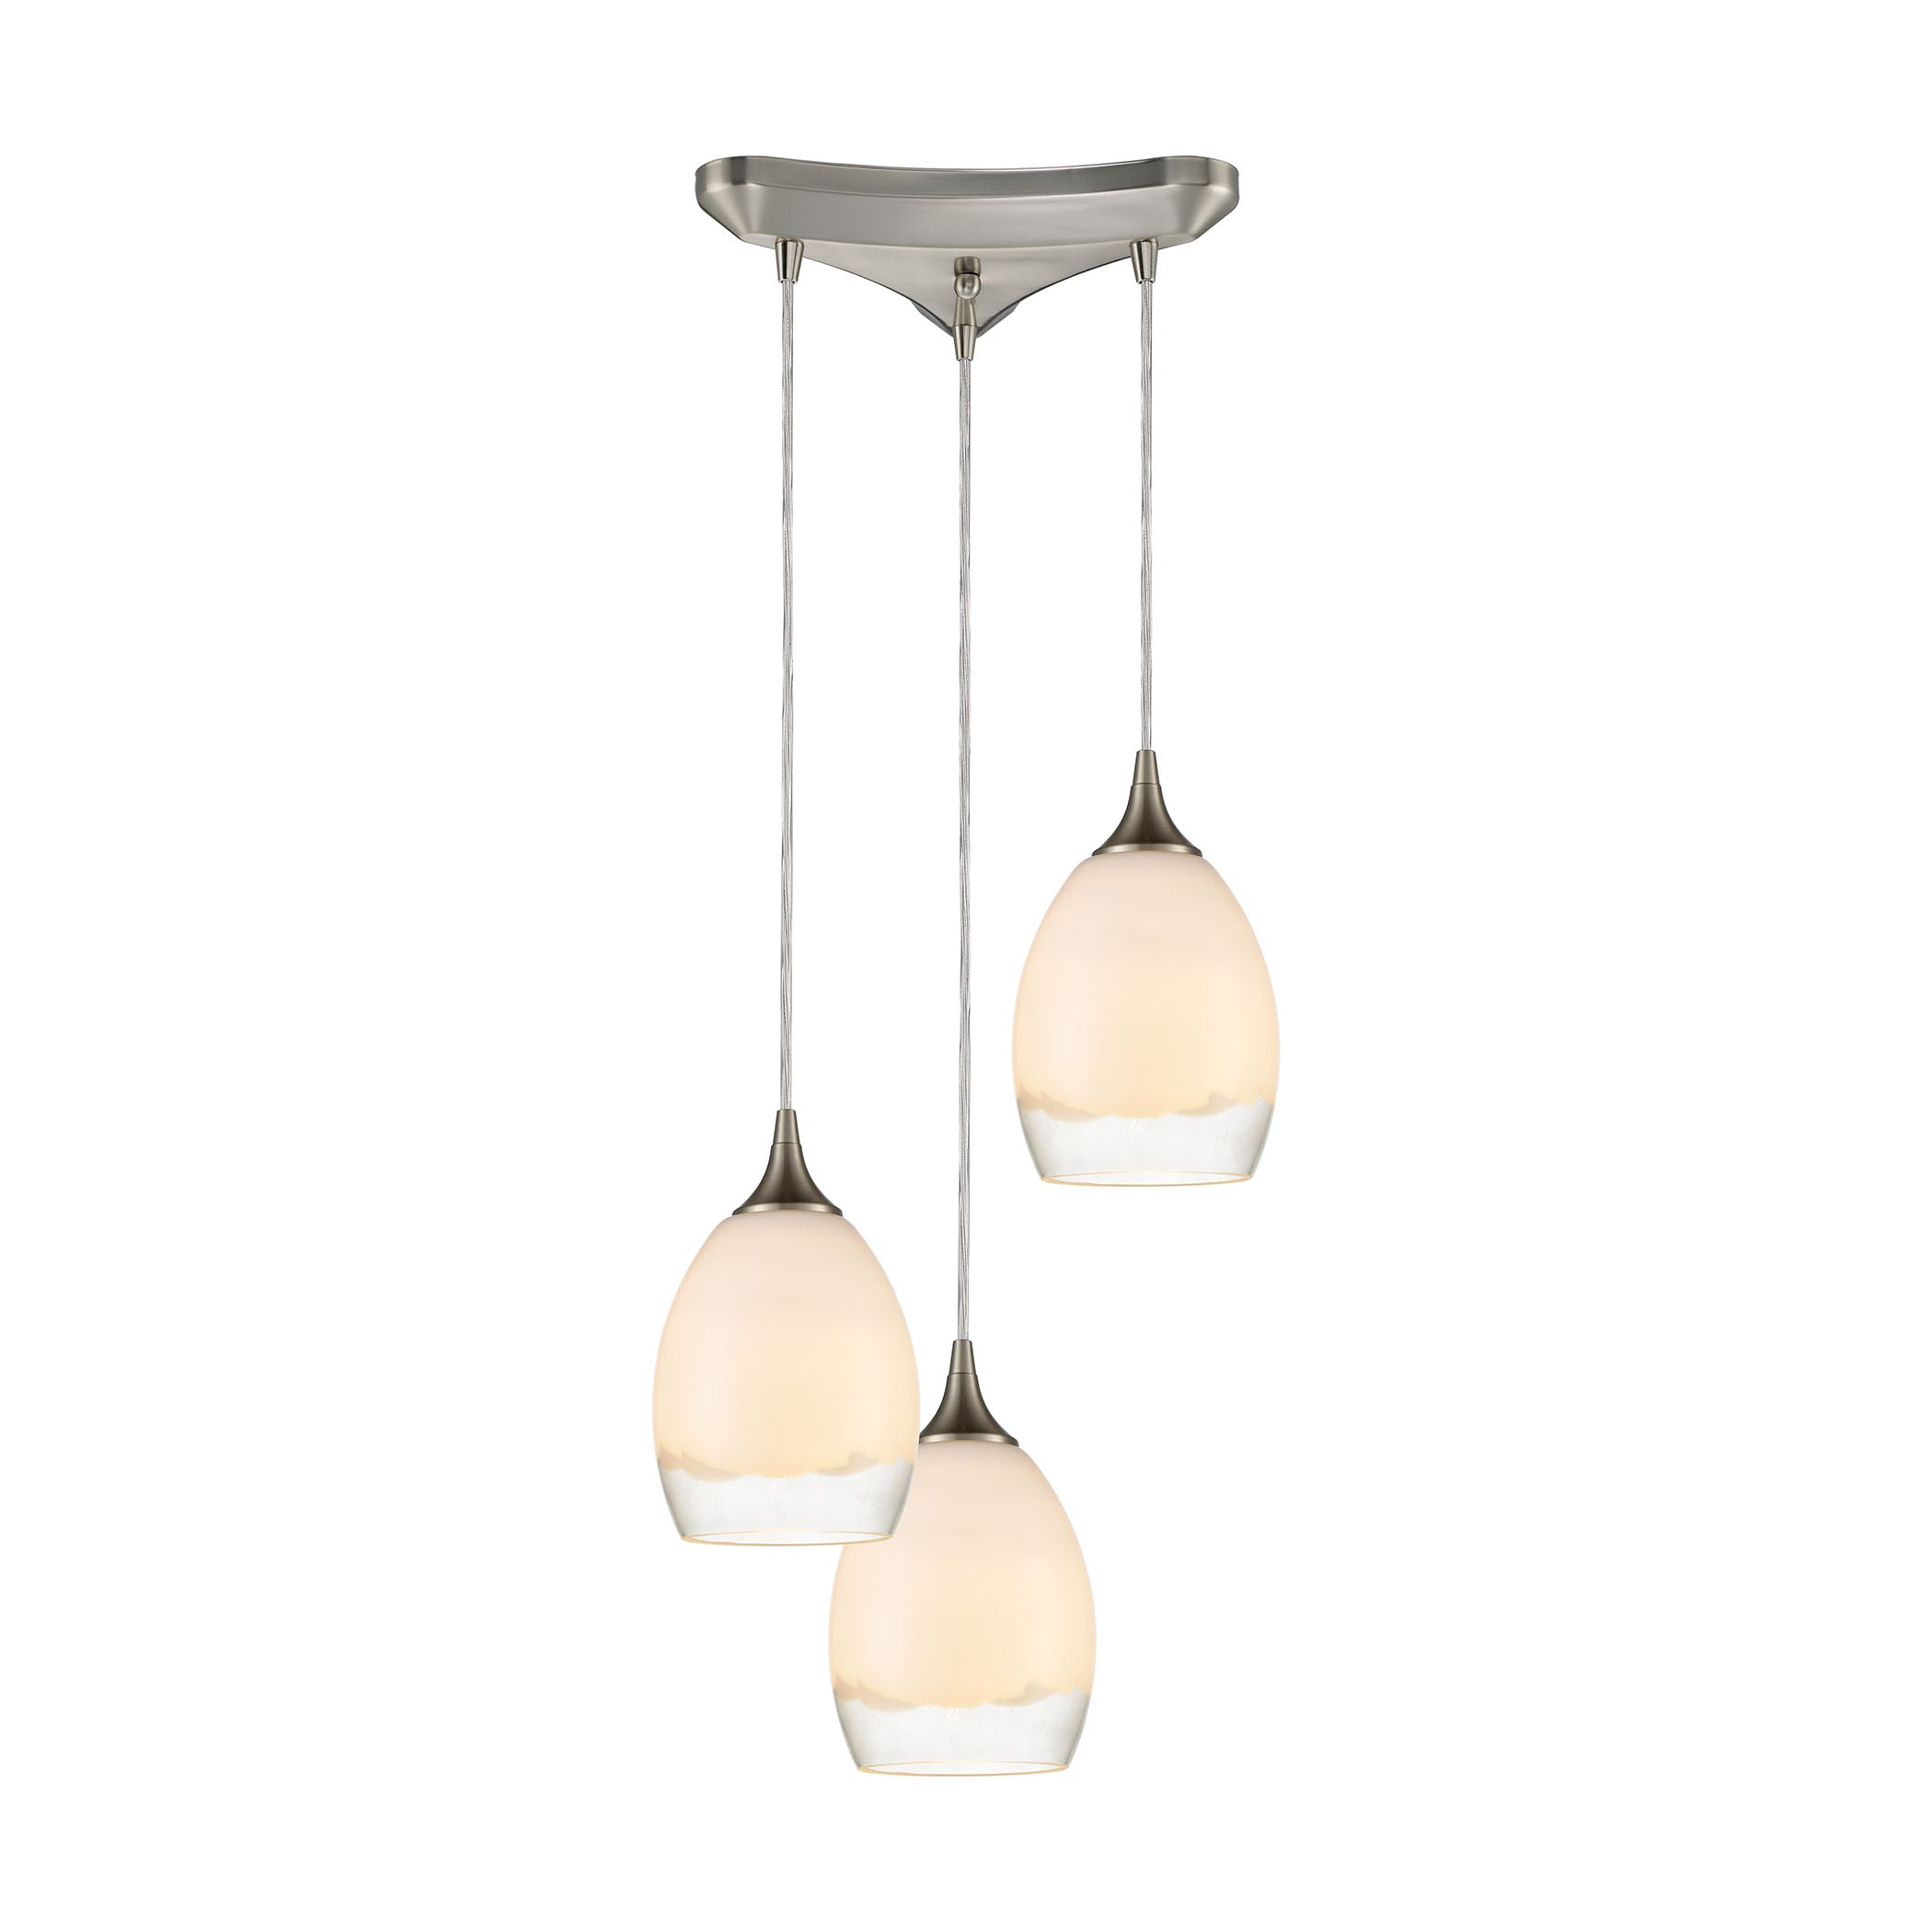 ELK Lighting 85214/3 Cirrus 3-Light Triangular Mini Pendant Fixture in Satin Nickel with Opal White and Clear Glass